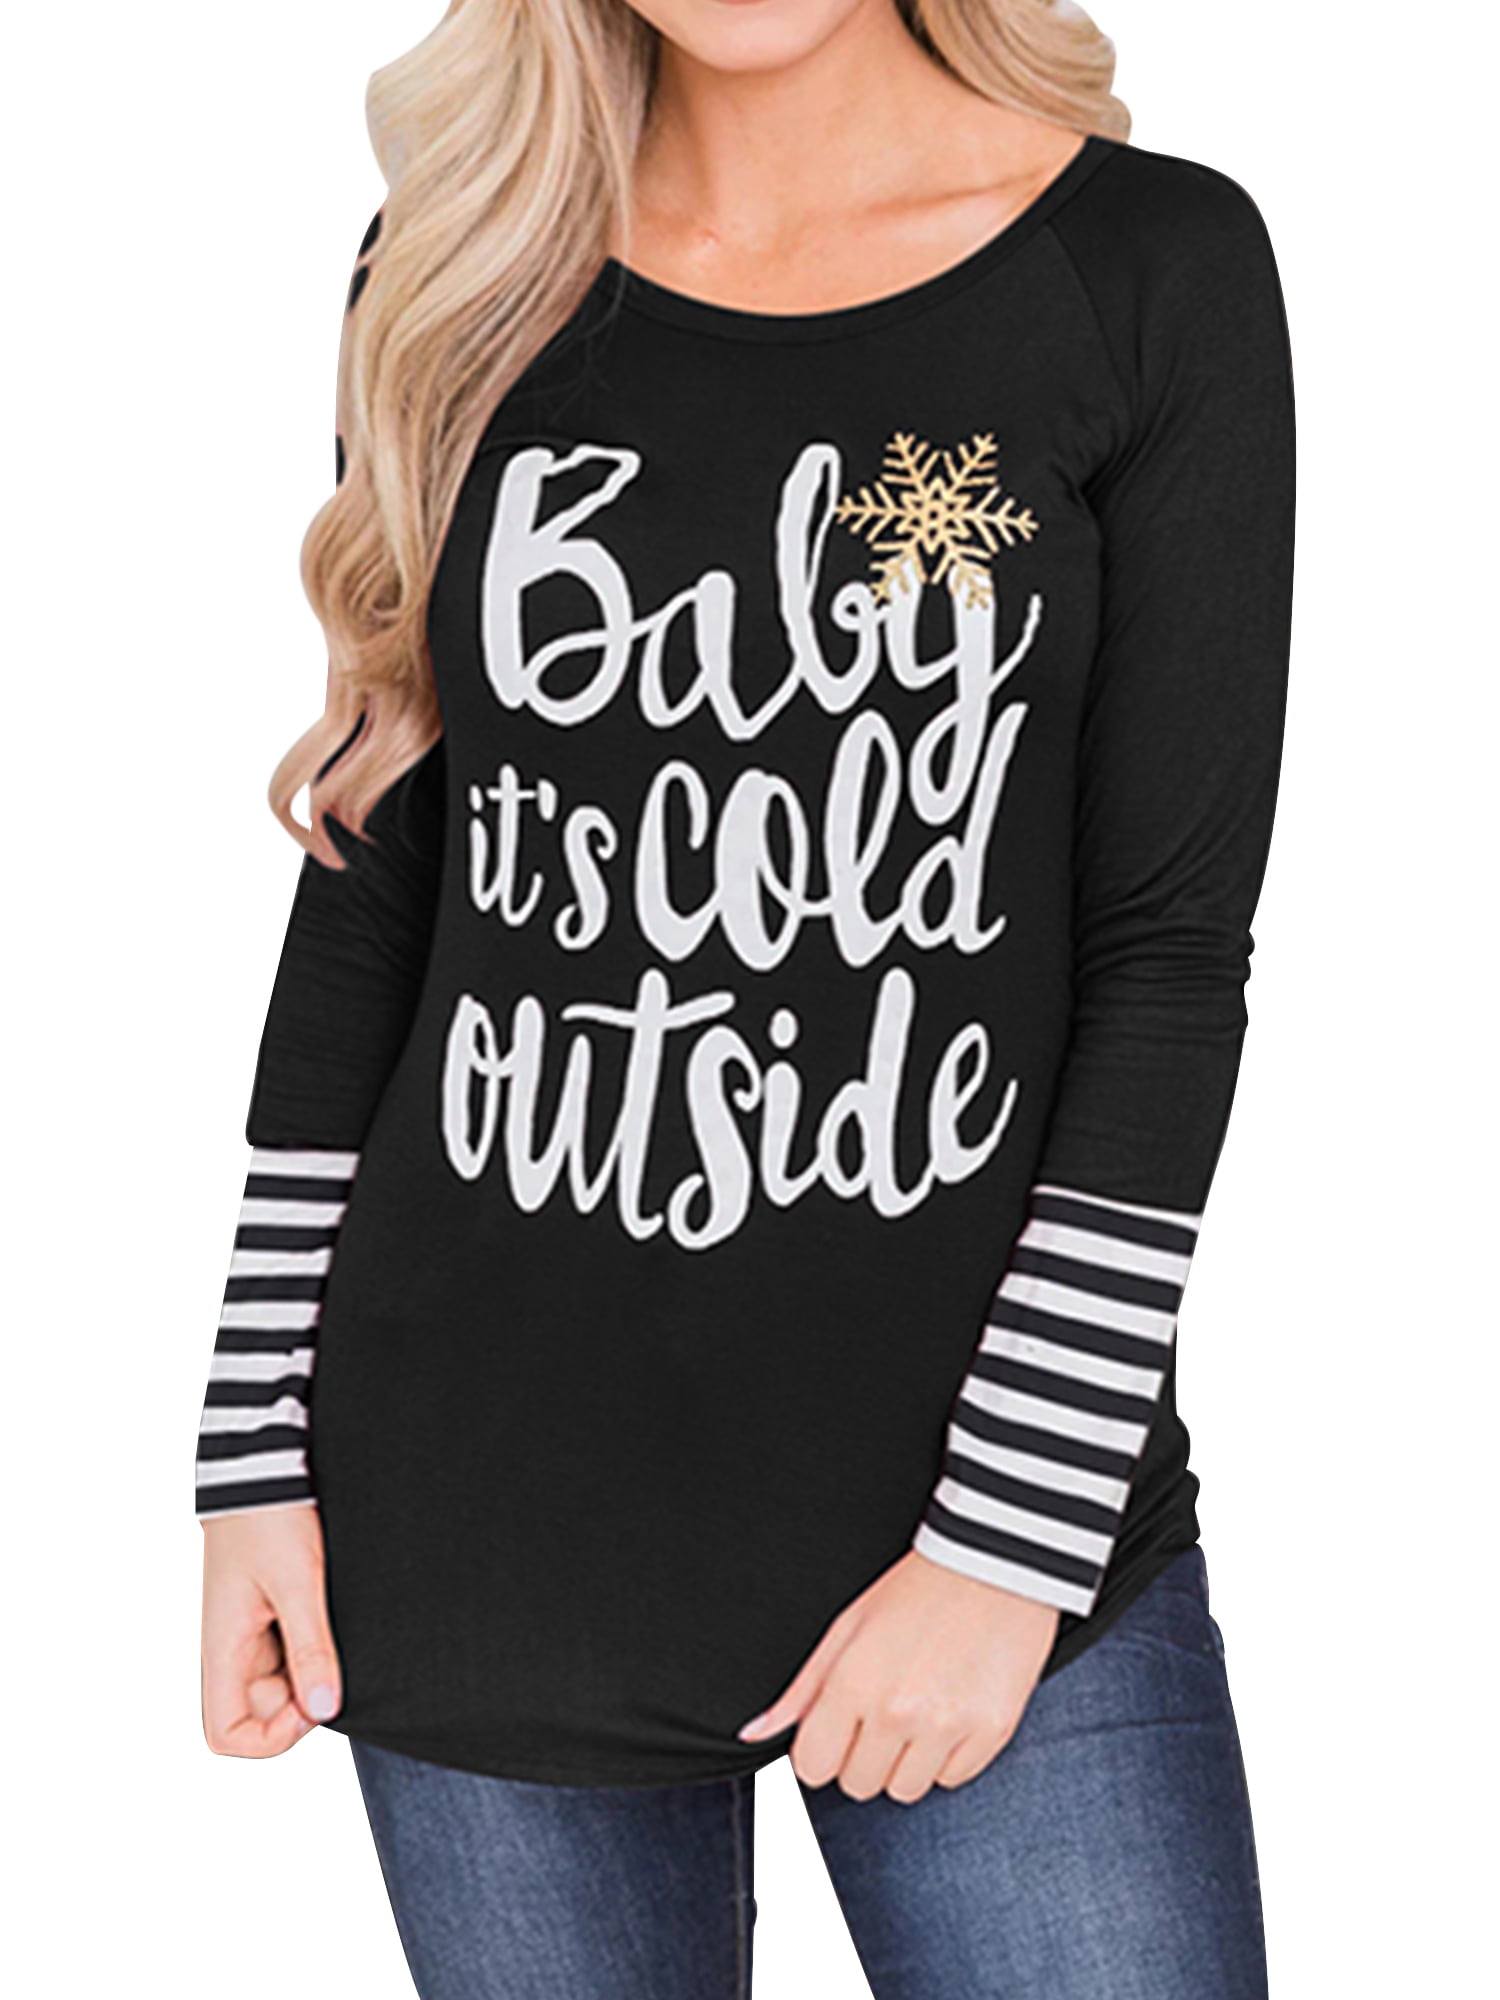 Christmas Shirts for Women Casual Long Sleeve Blouse Tops Dressy Christmas Tree Print Graphic Tees Flowy Pullover Tunic